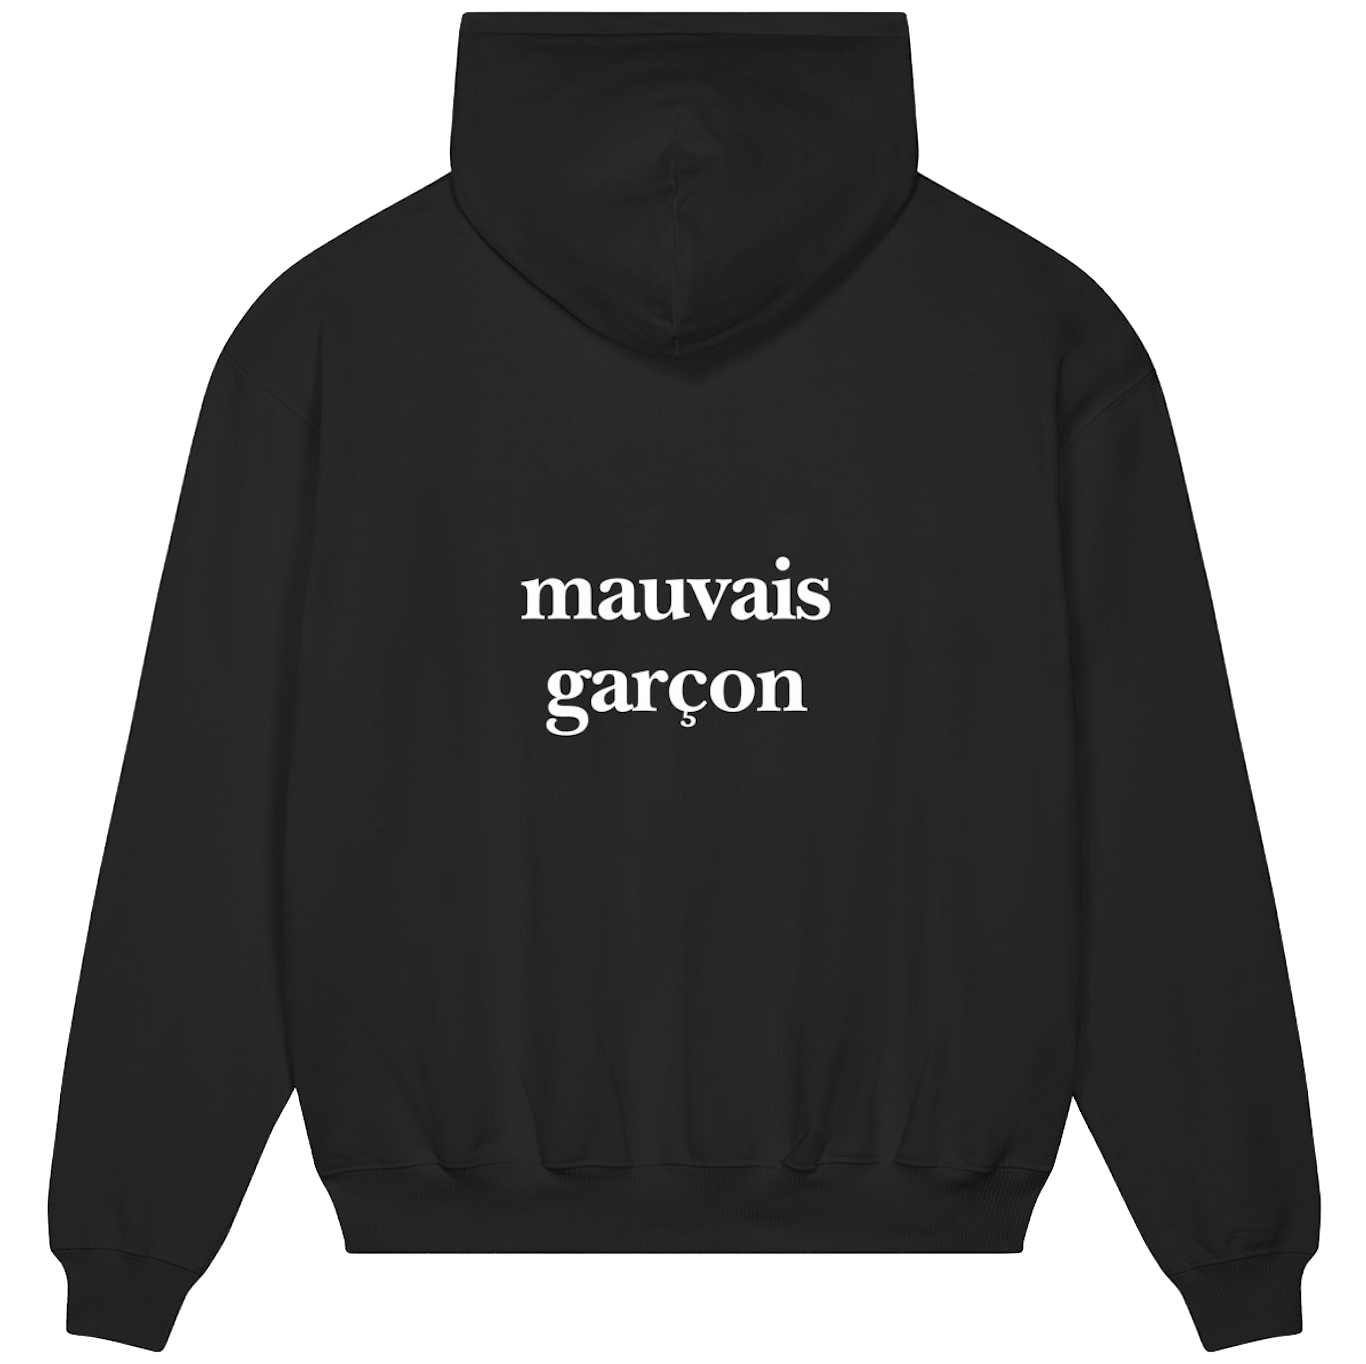 Wrap up in comfort with Garçon Garçon's collection of hoodies and sweats. Merging Parisian chic with ultimate coziness, our loungewear is perfect for any casual occasion.